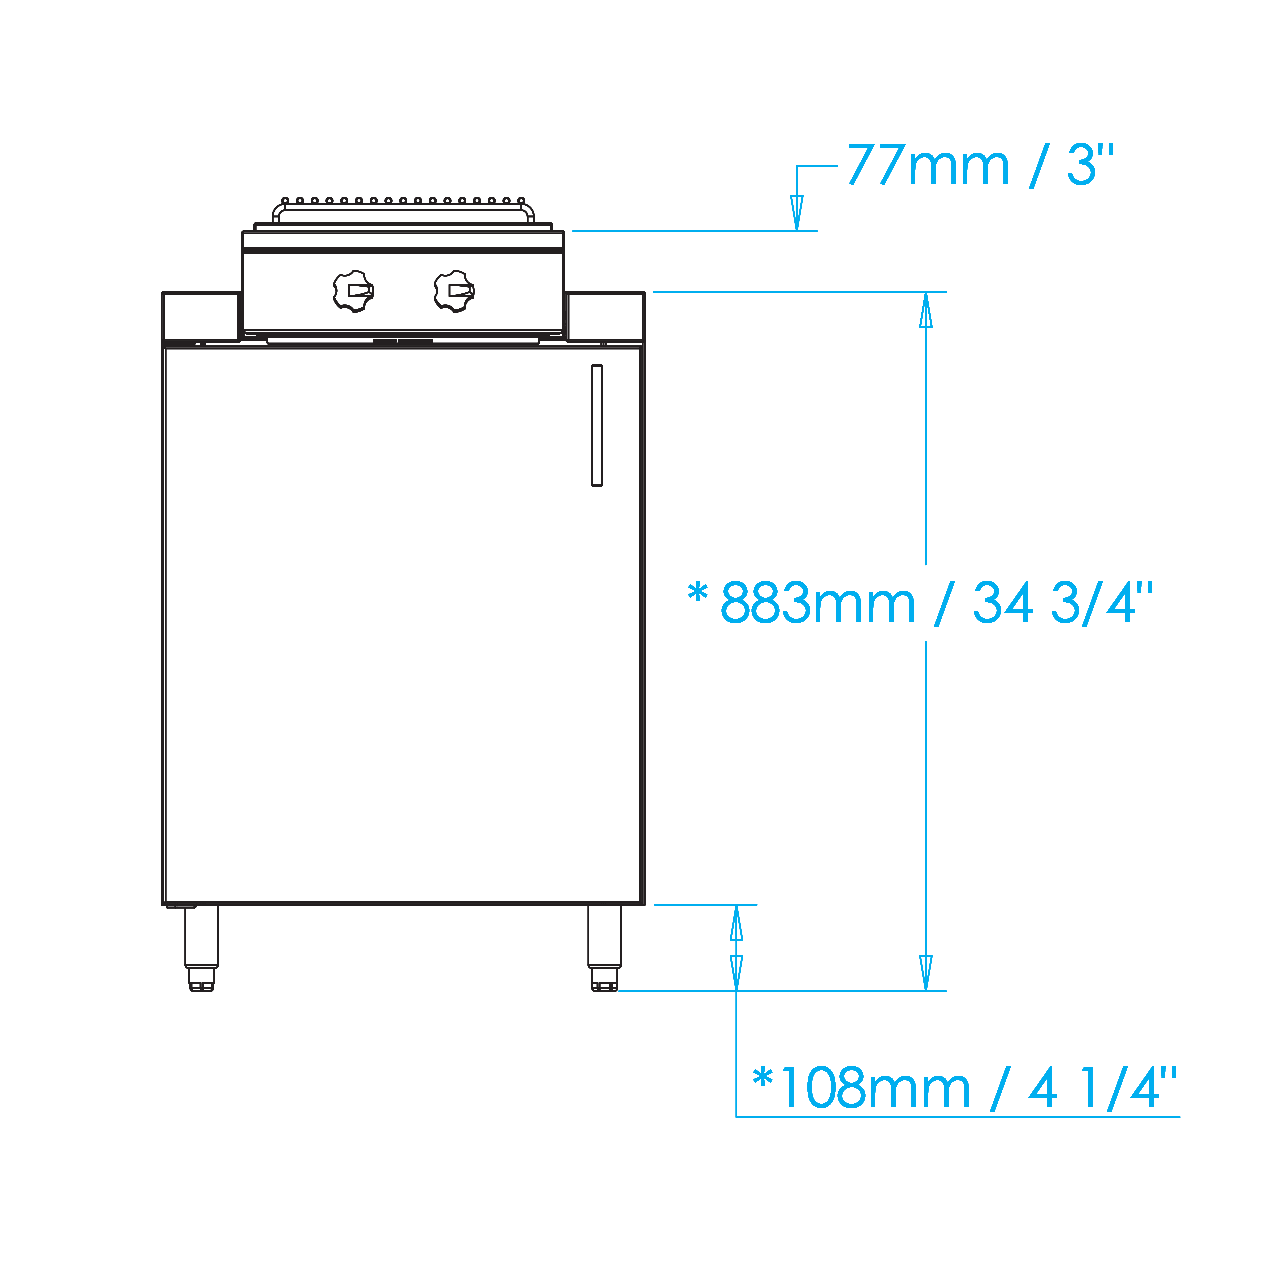 Signature 24-inch Cooktop Cabinet Dimensions Image